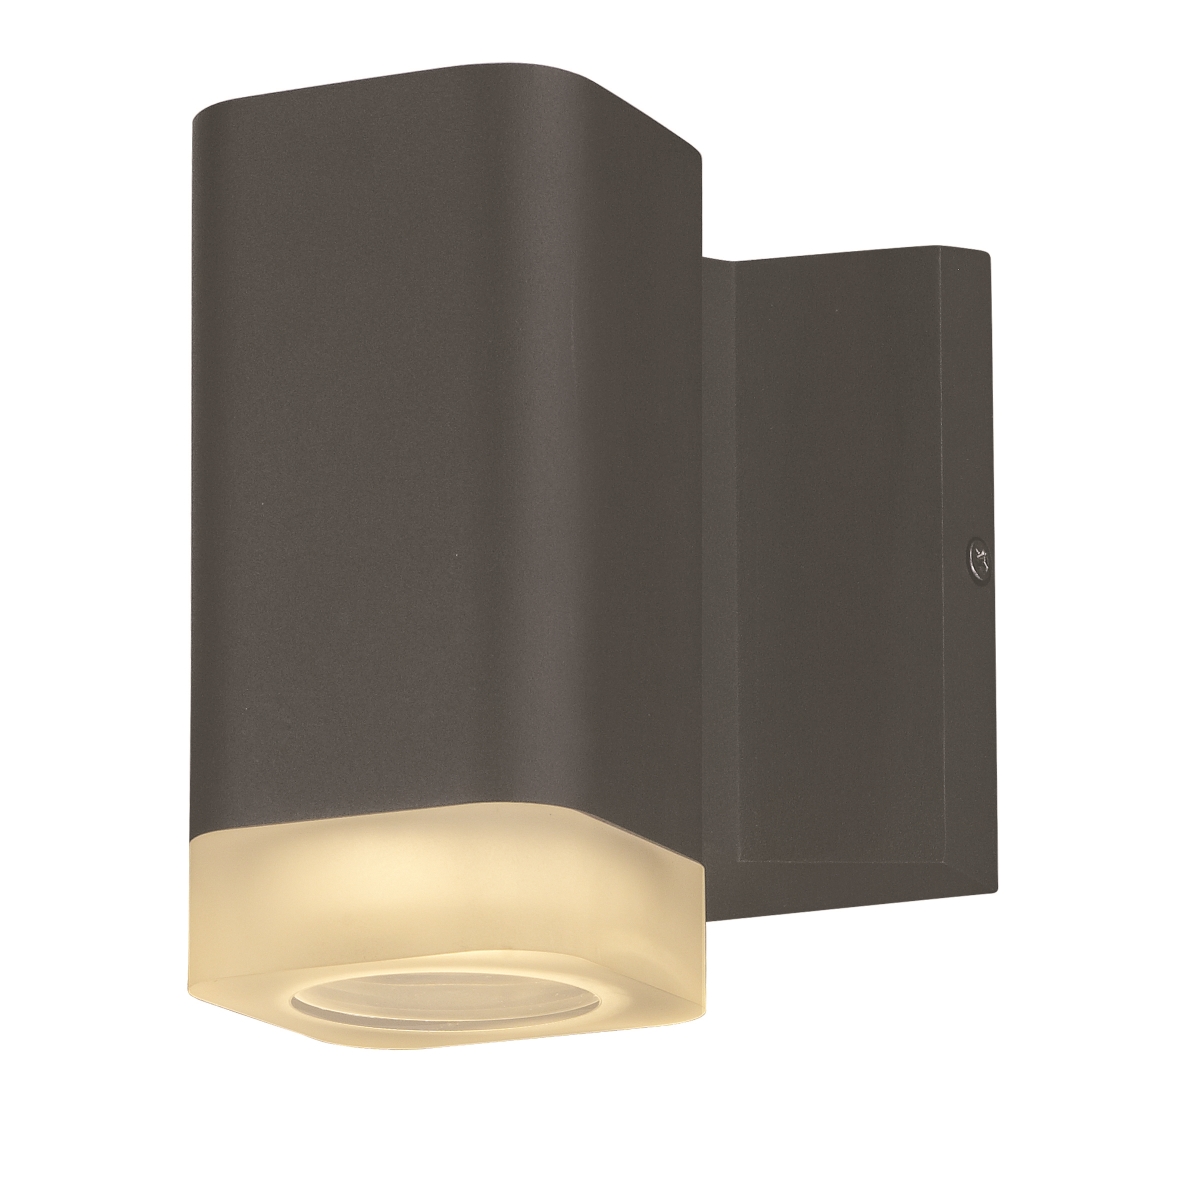 5 In. Lightray Led Wall Sconce - Architectural Bronze